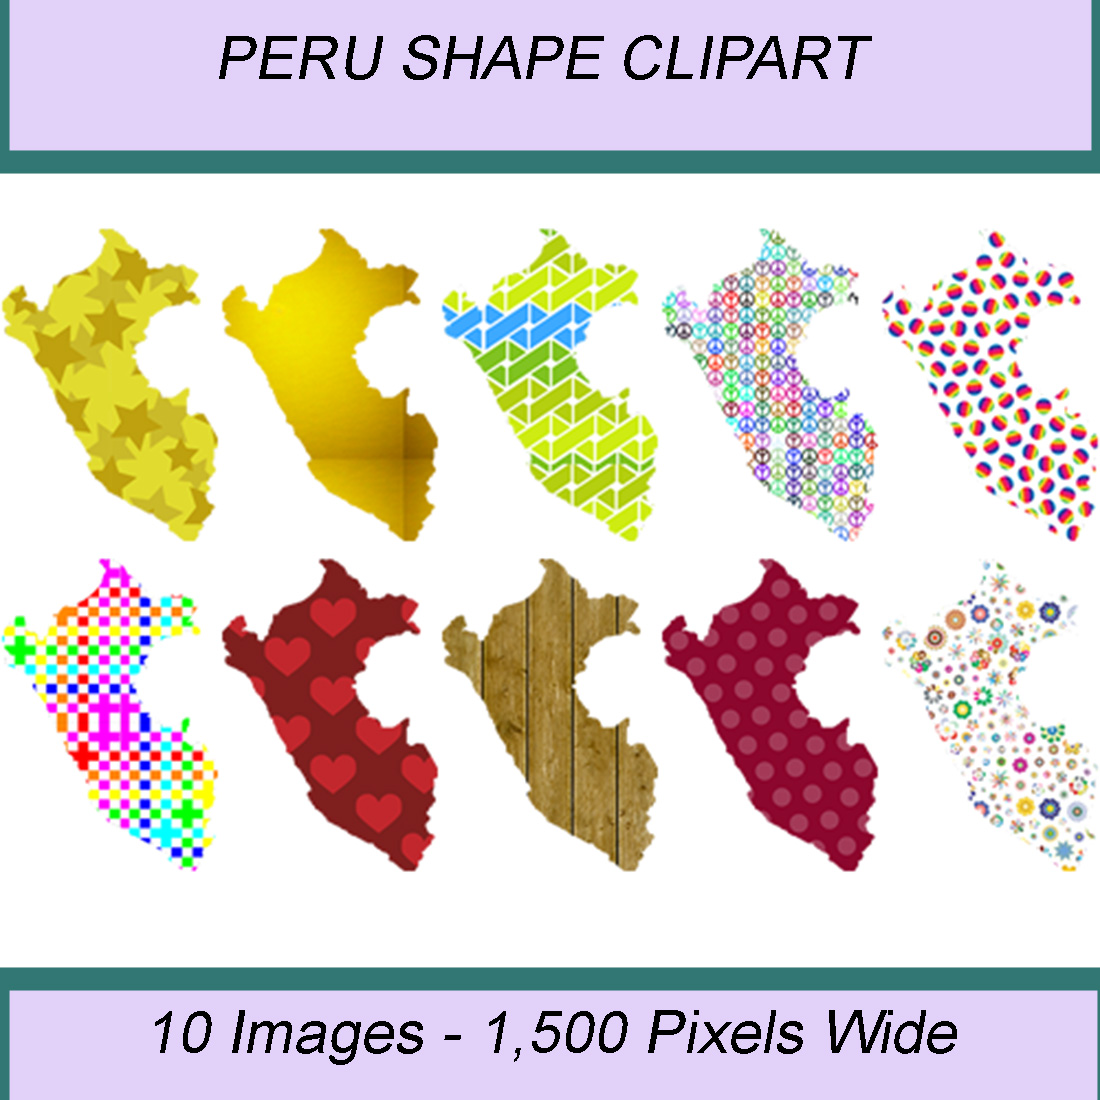 PERU SHAPE CLIPART ICONS cover image.